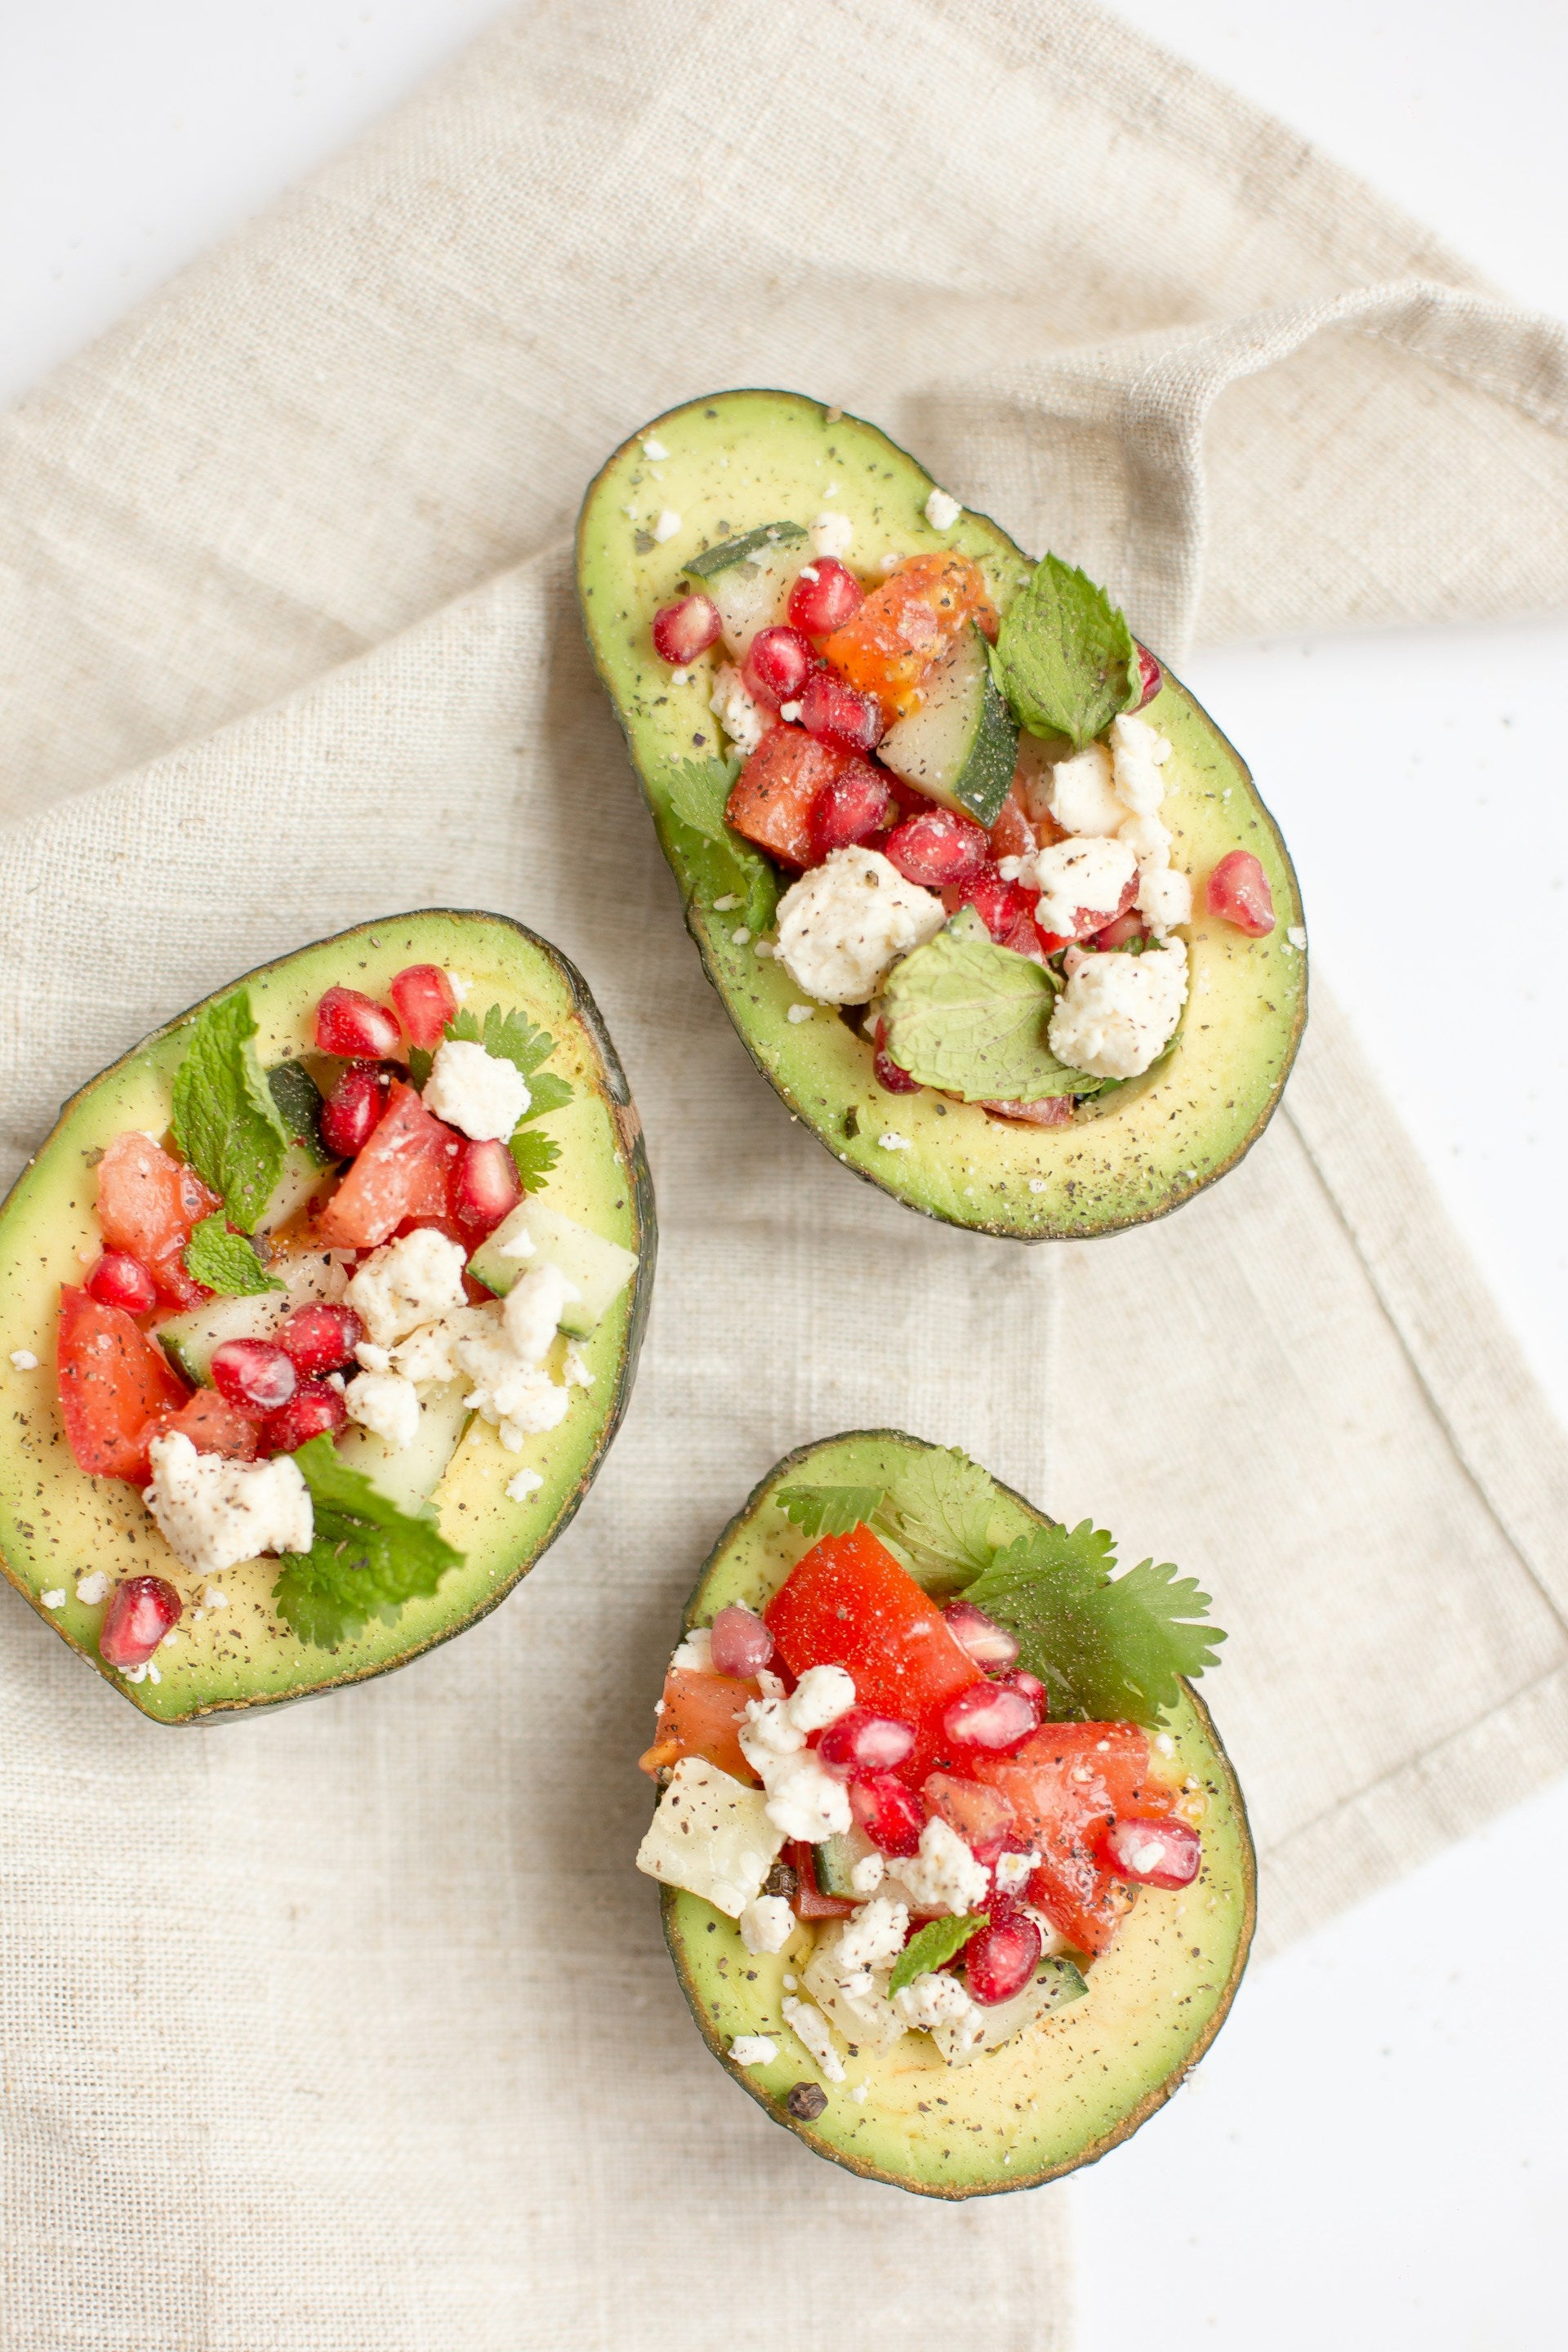 An image of three avocado halves filled with tomatoes, feta, and herbs